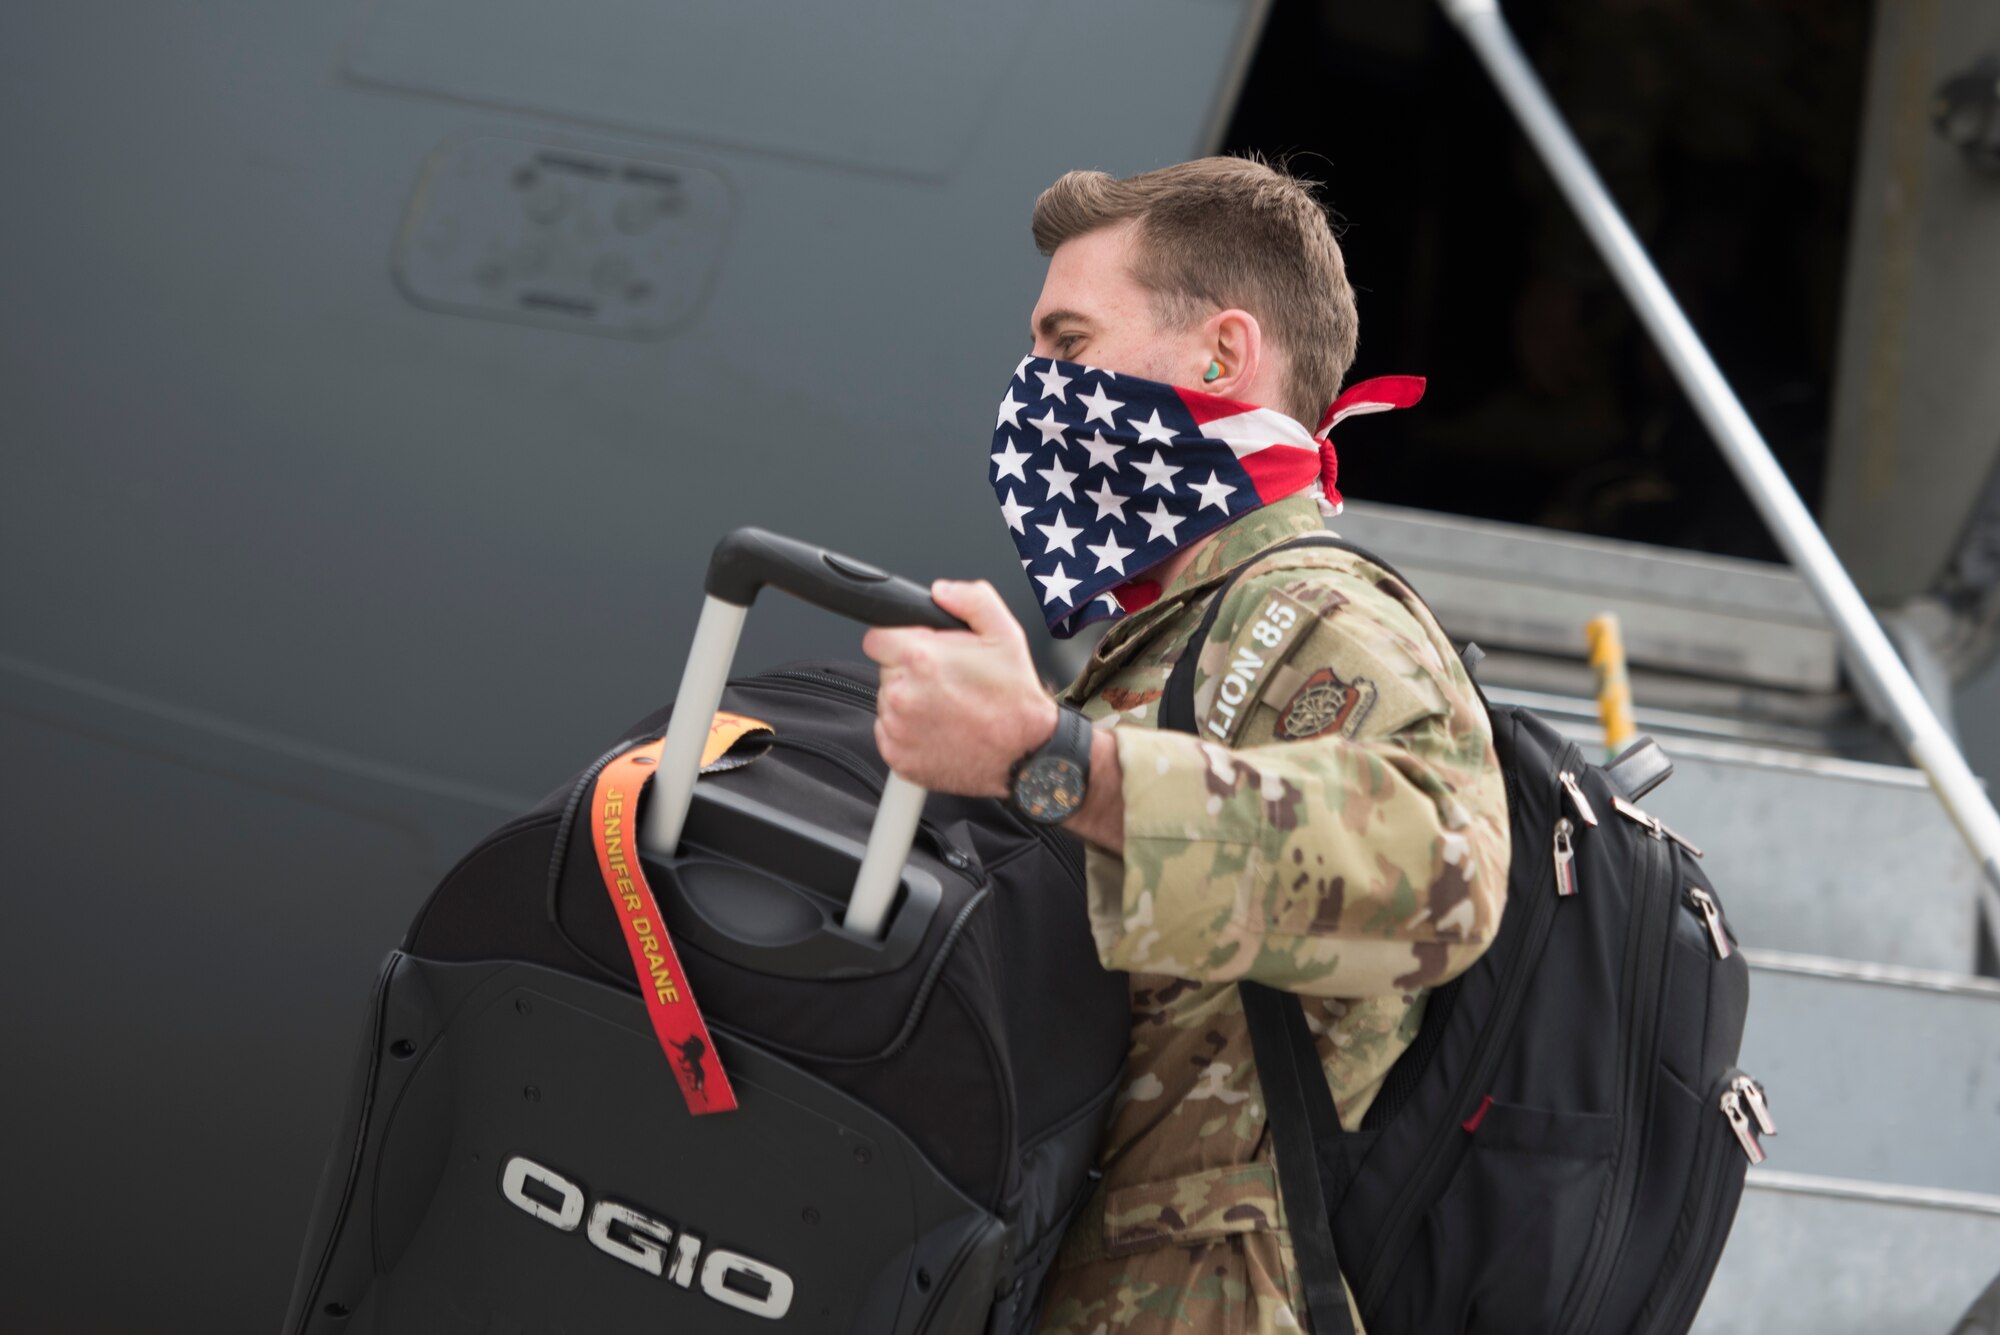 A photo of an Airman bringing his luggage off of a plane.